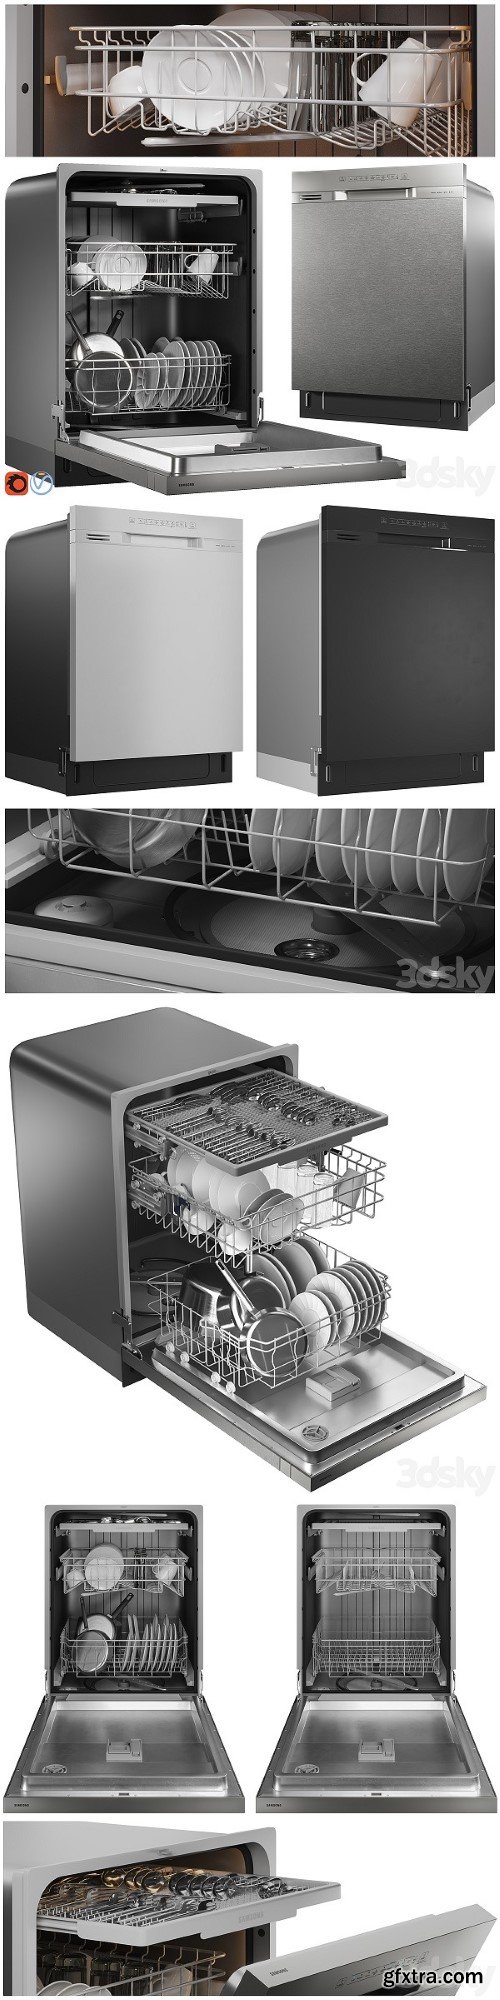 Front Control Dishwasher 001